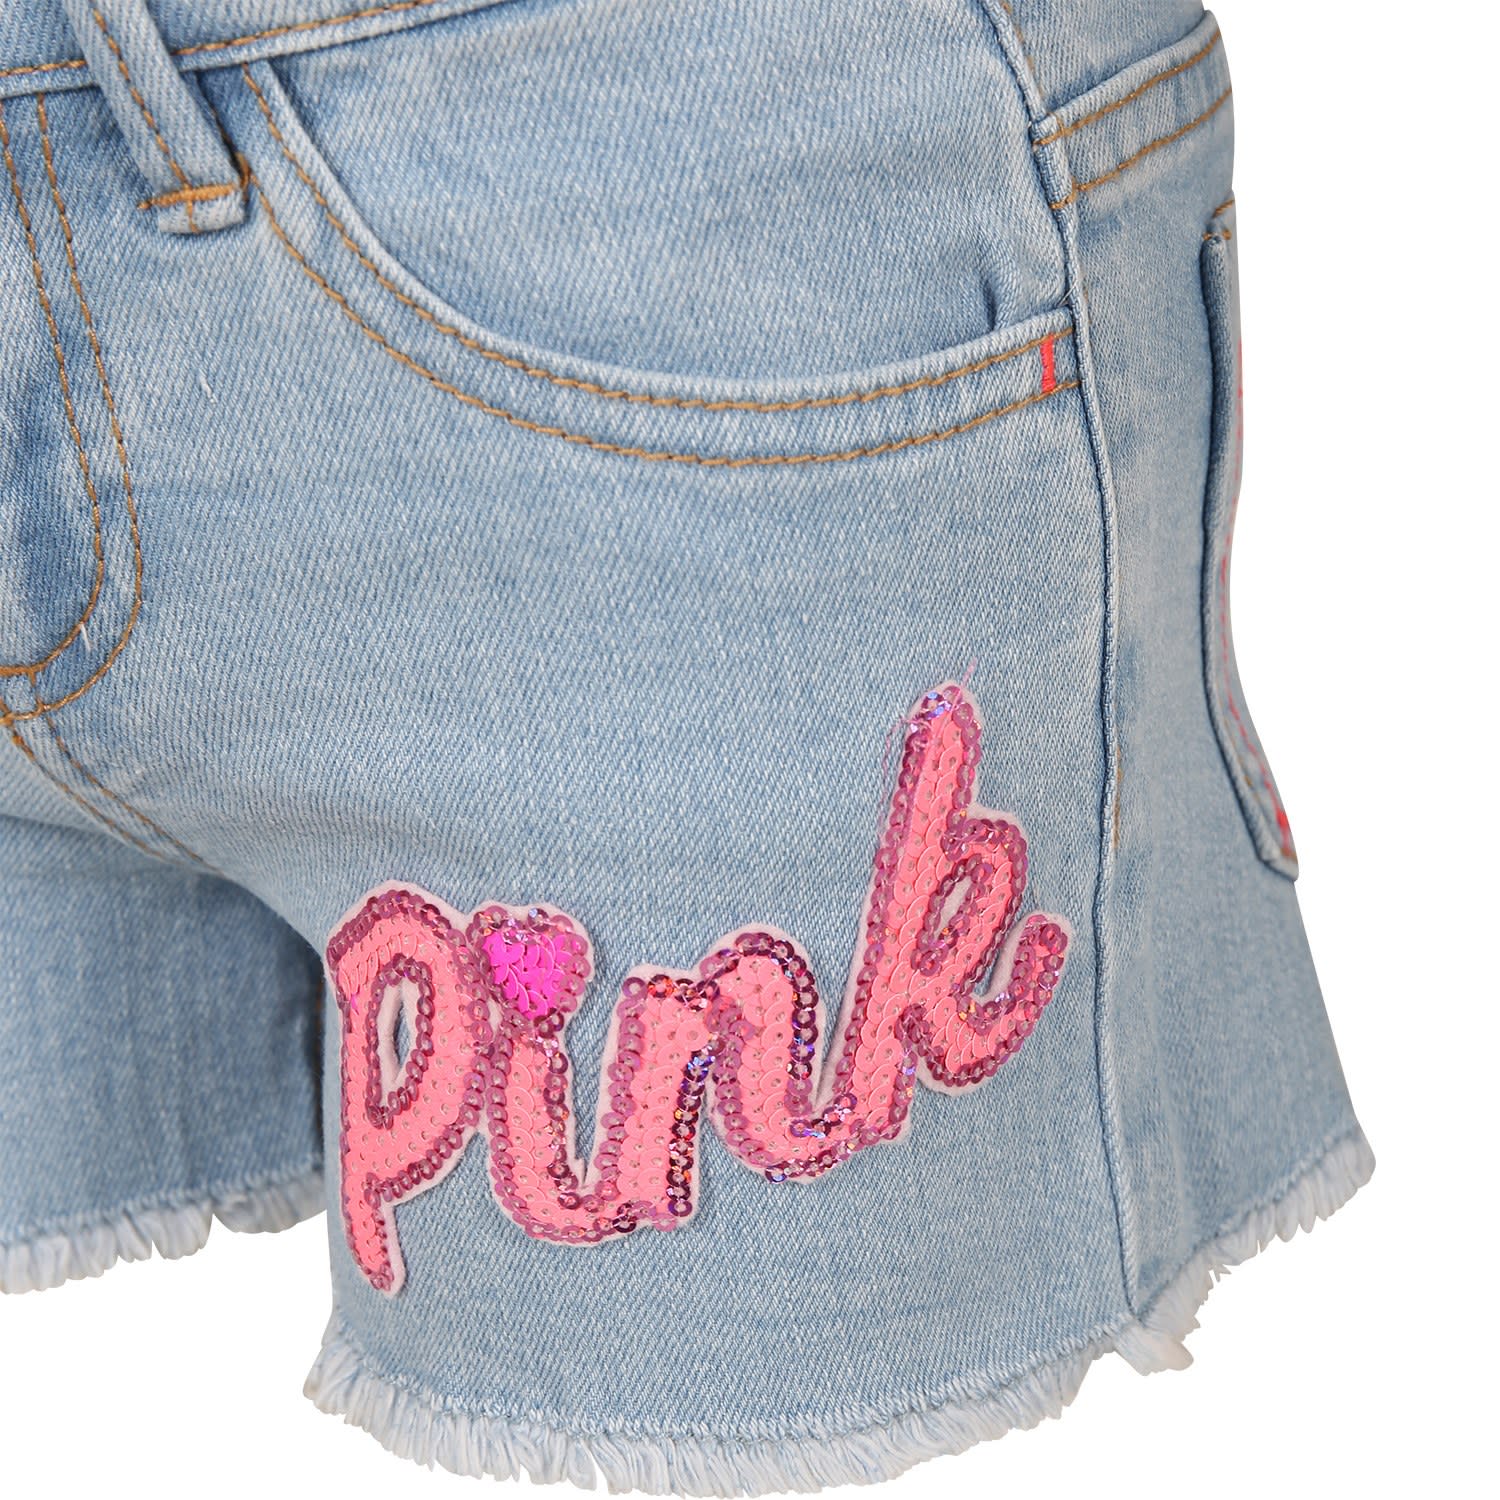 Shop Billieblush Denim Shorts For Girl With Sequin Patches